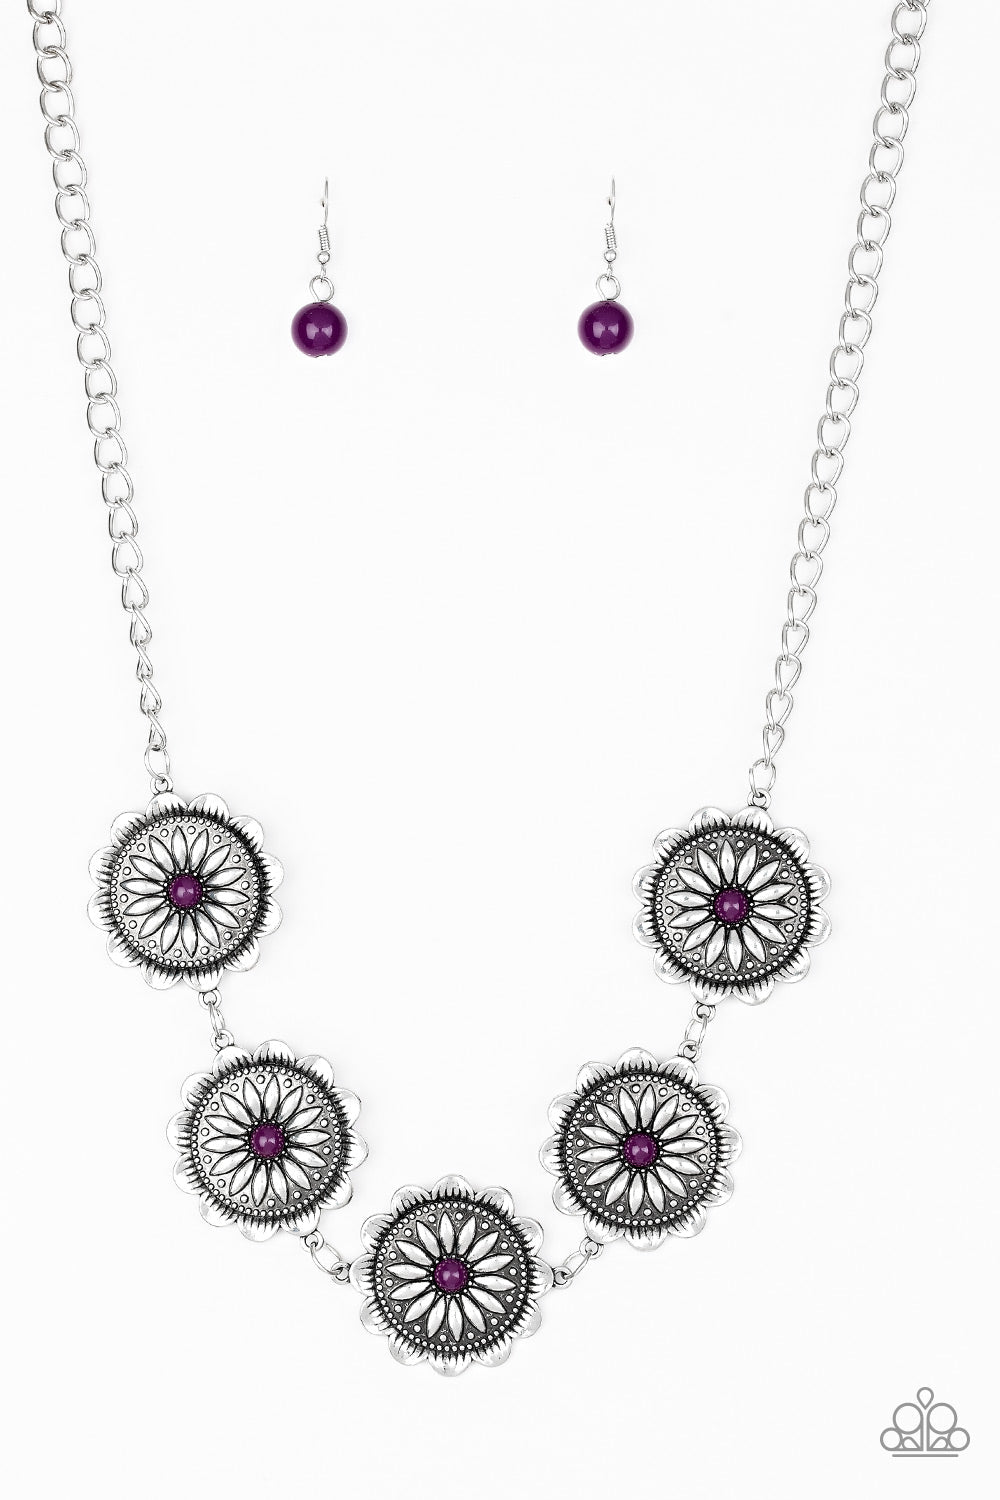 Me-dallions, Myself, and I - Purple and Silver Necklace - Paparazzi Accessories - Infused with shiny plum beaded centers, ornate floral stamped frames link below the collar for a colorfully, seasonal look. Features an adjustable clasp closure. Sold as one individual necklace.